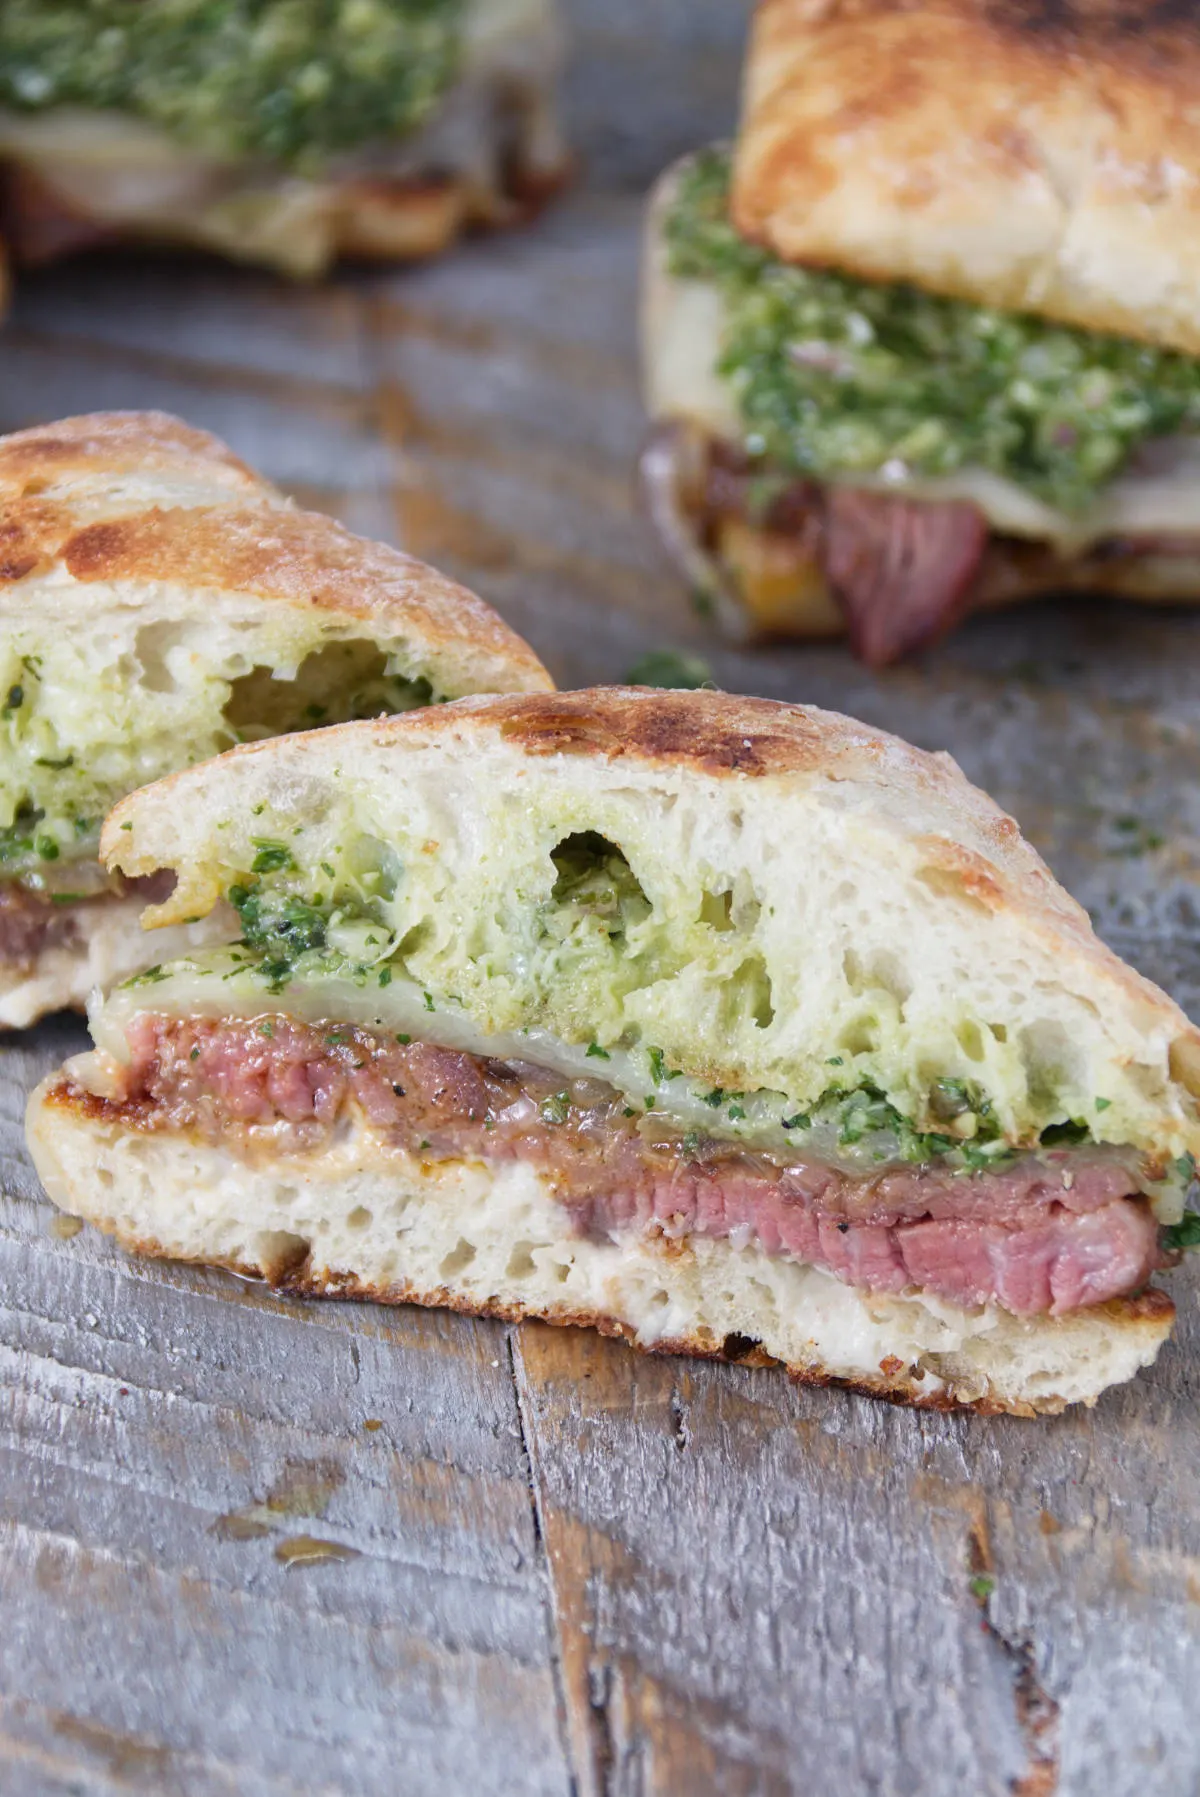 tri-tip sandwiches on a ciabatta roll with herby minto cilantro chimichurri and melted provolone cheese sliced in half diagonally